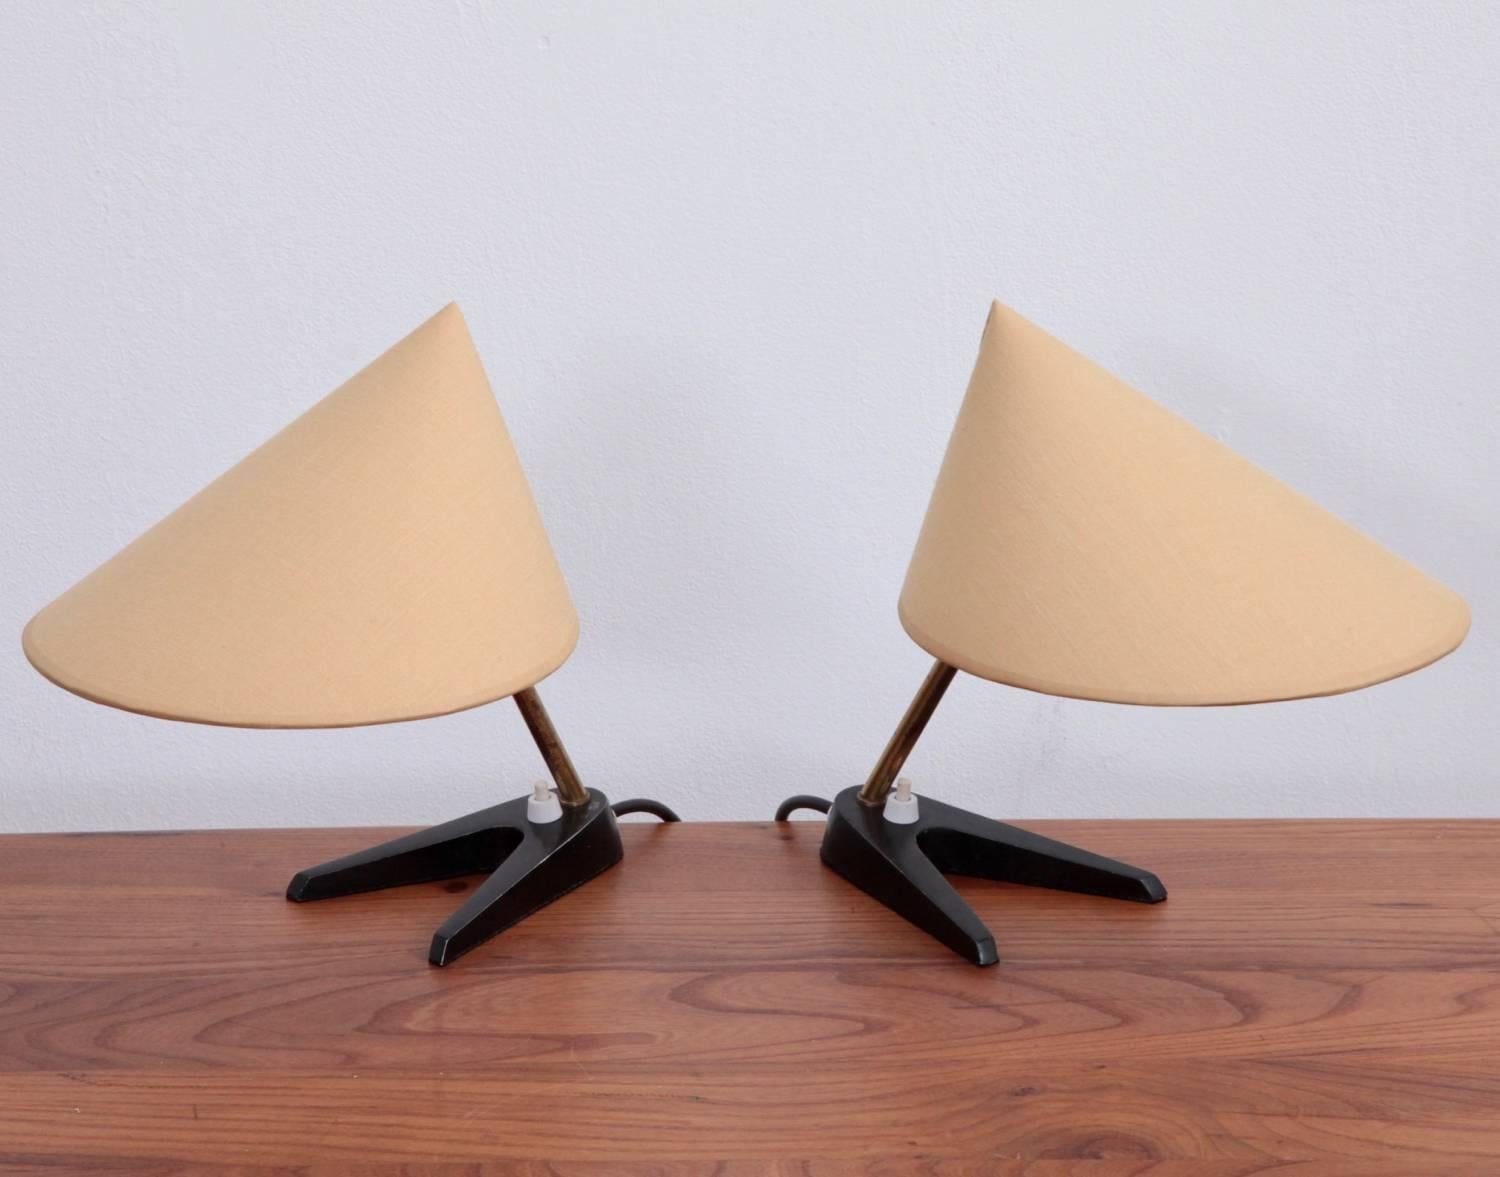 Pair of very cute 1950s table lamps in brass and black lacquered feet. New Chinese hat shades. One x E14 each lamp.

